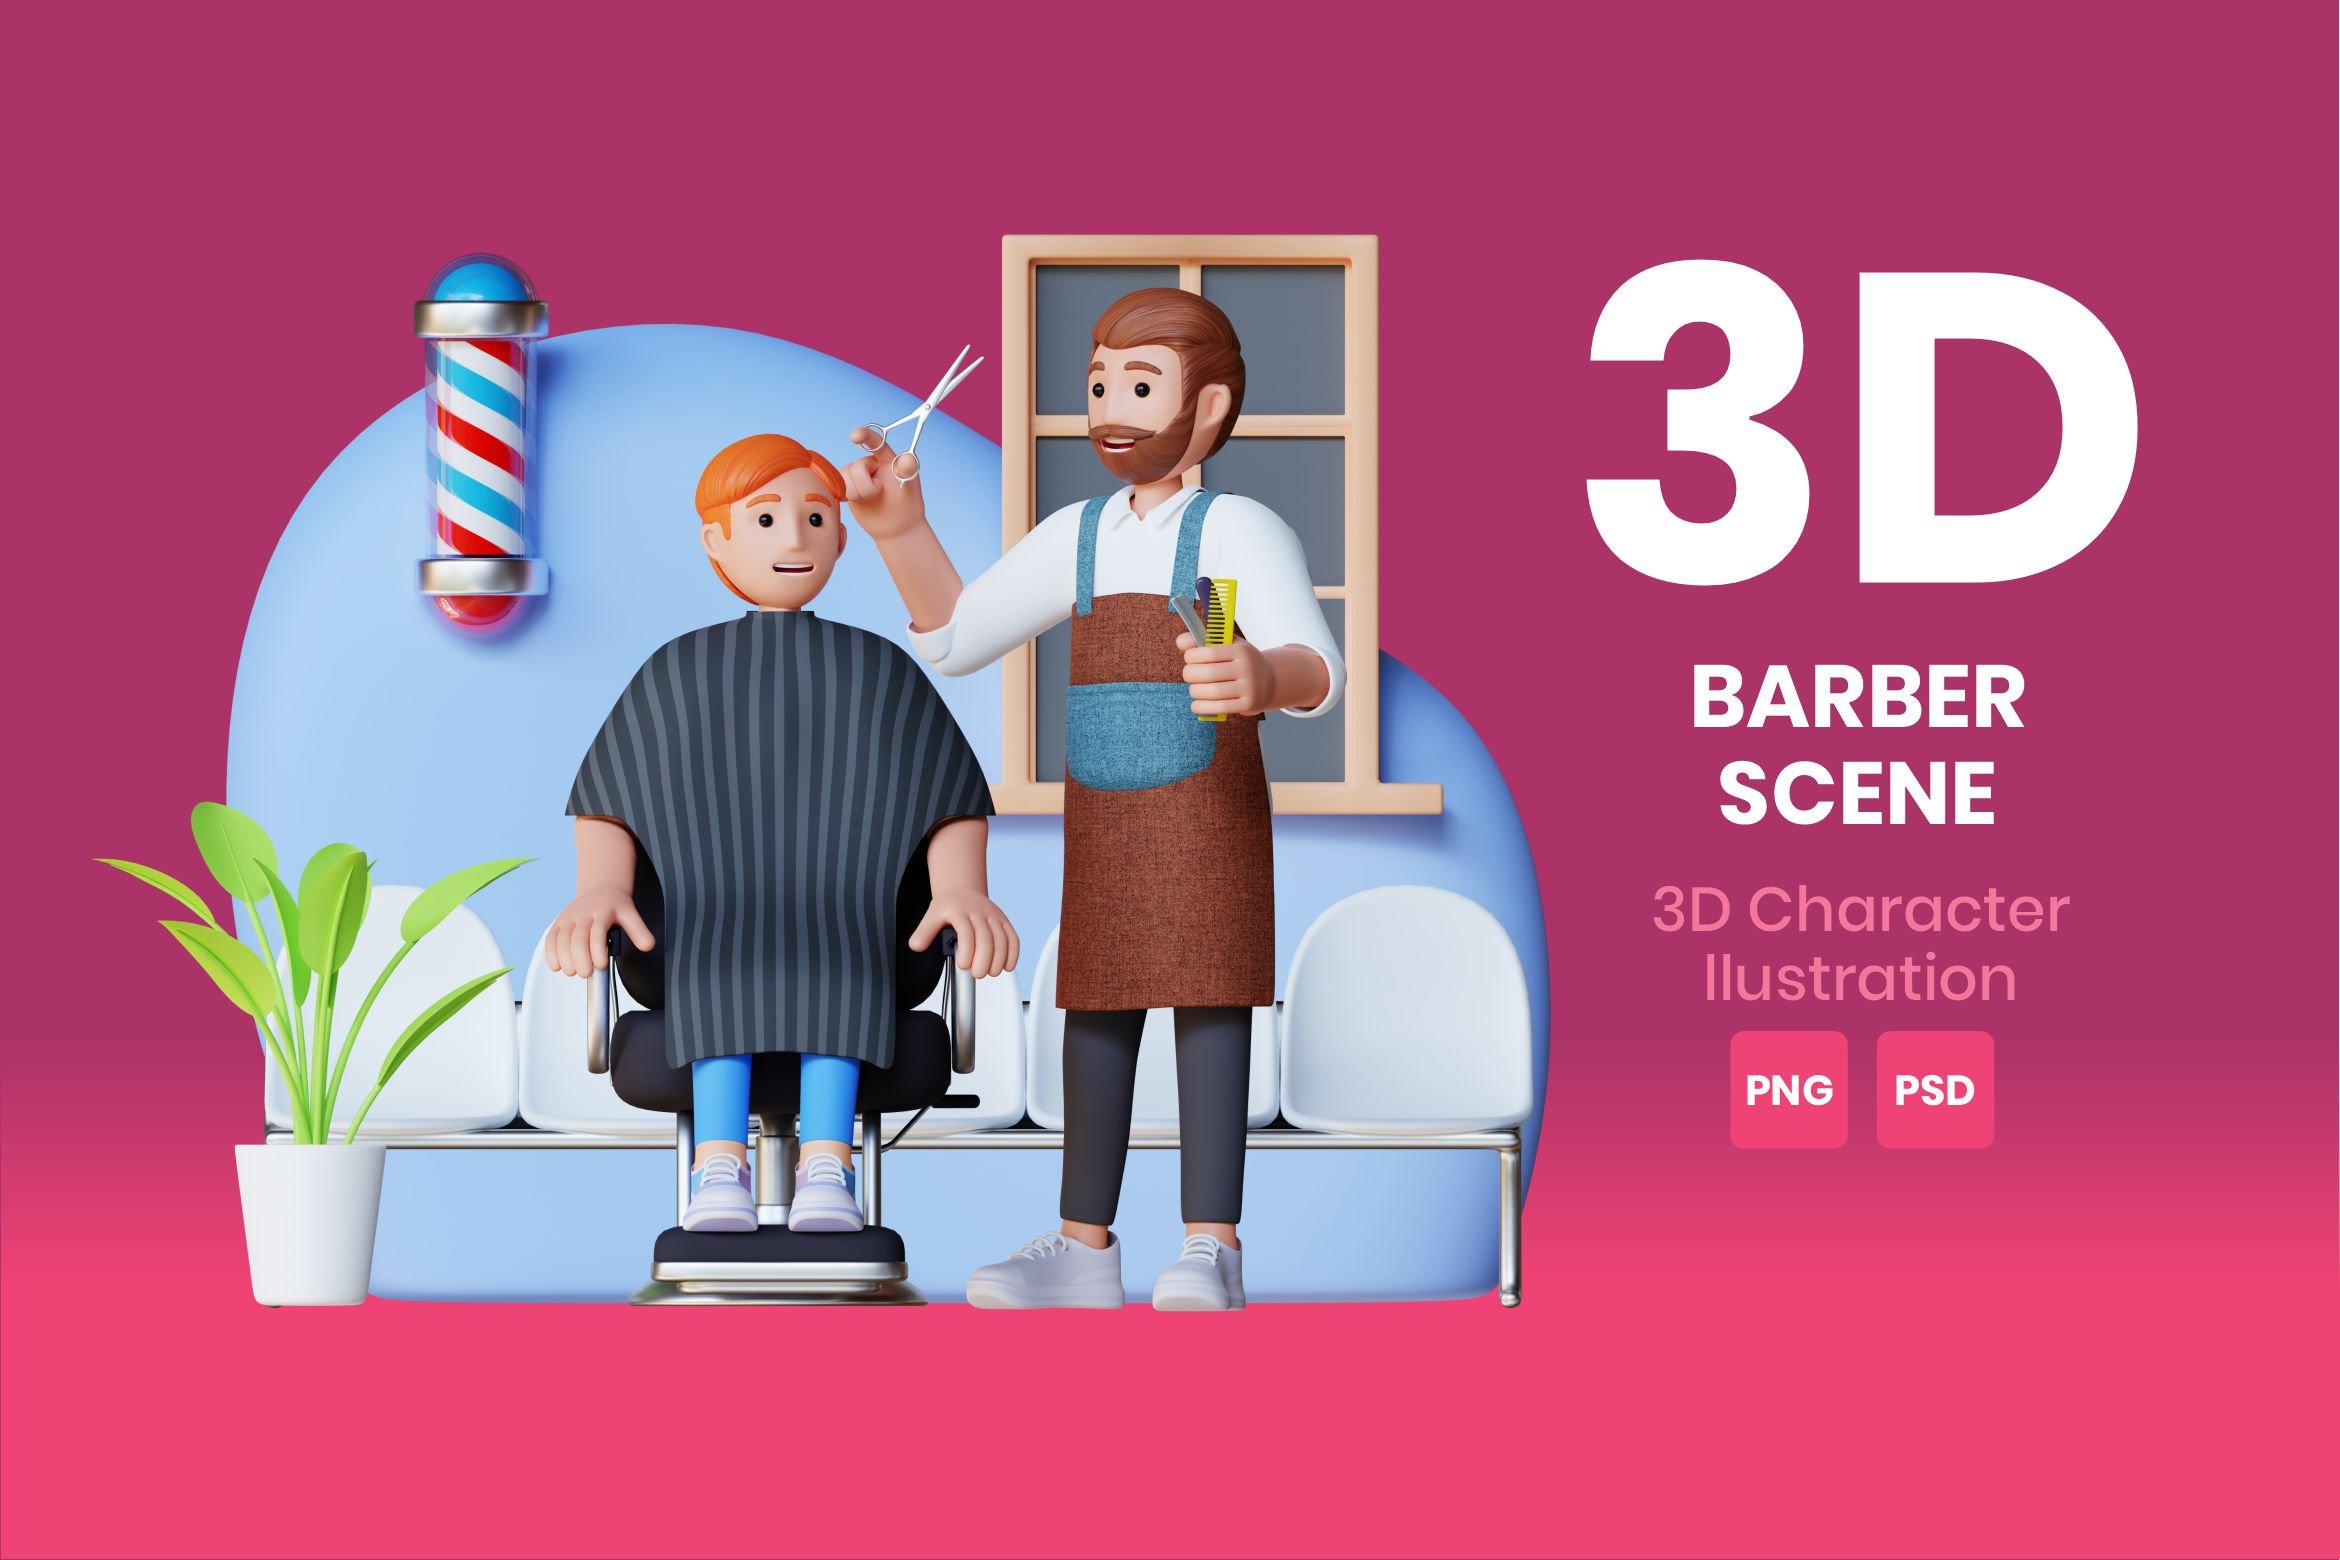 Barber Scene 3d Character cover image.